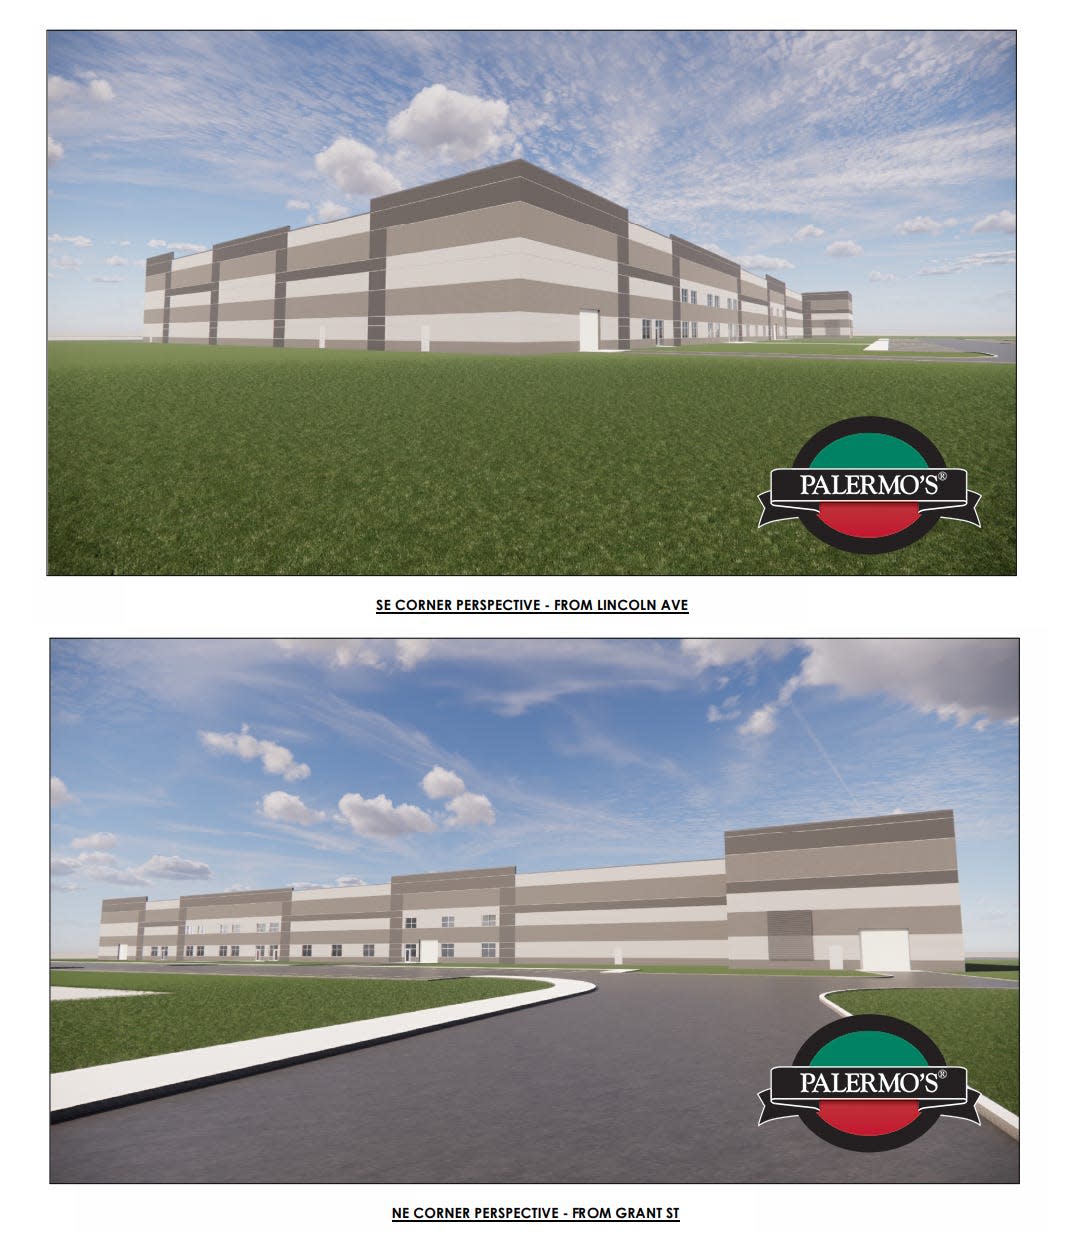 The new Palermo's frozen pizza production facility is planned the former Froedtert Malt complex in West Milwaukee.